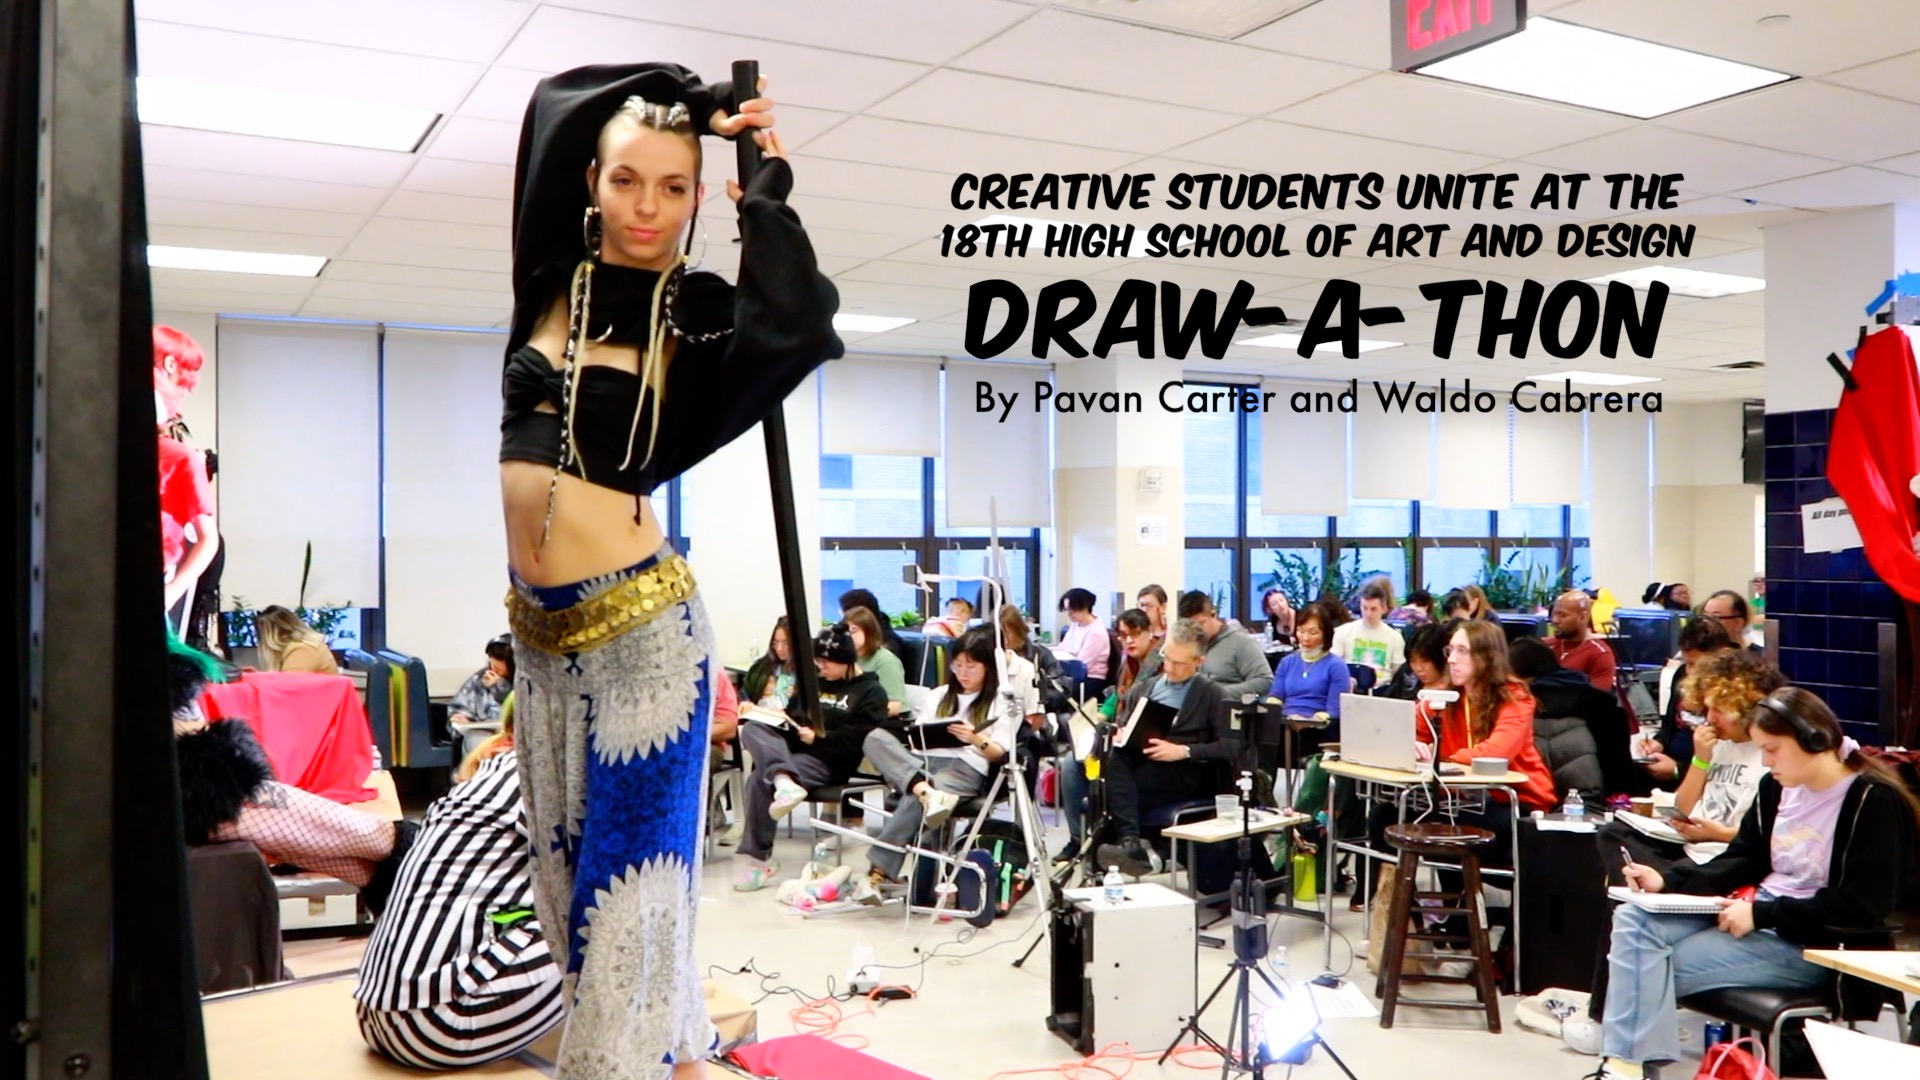 Creative Students Unite at the 18th High School of Art and Design Draw-A-Thon